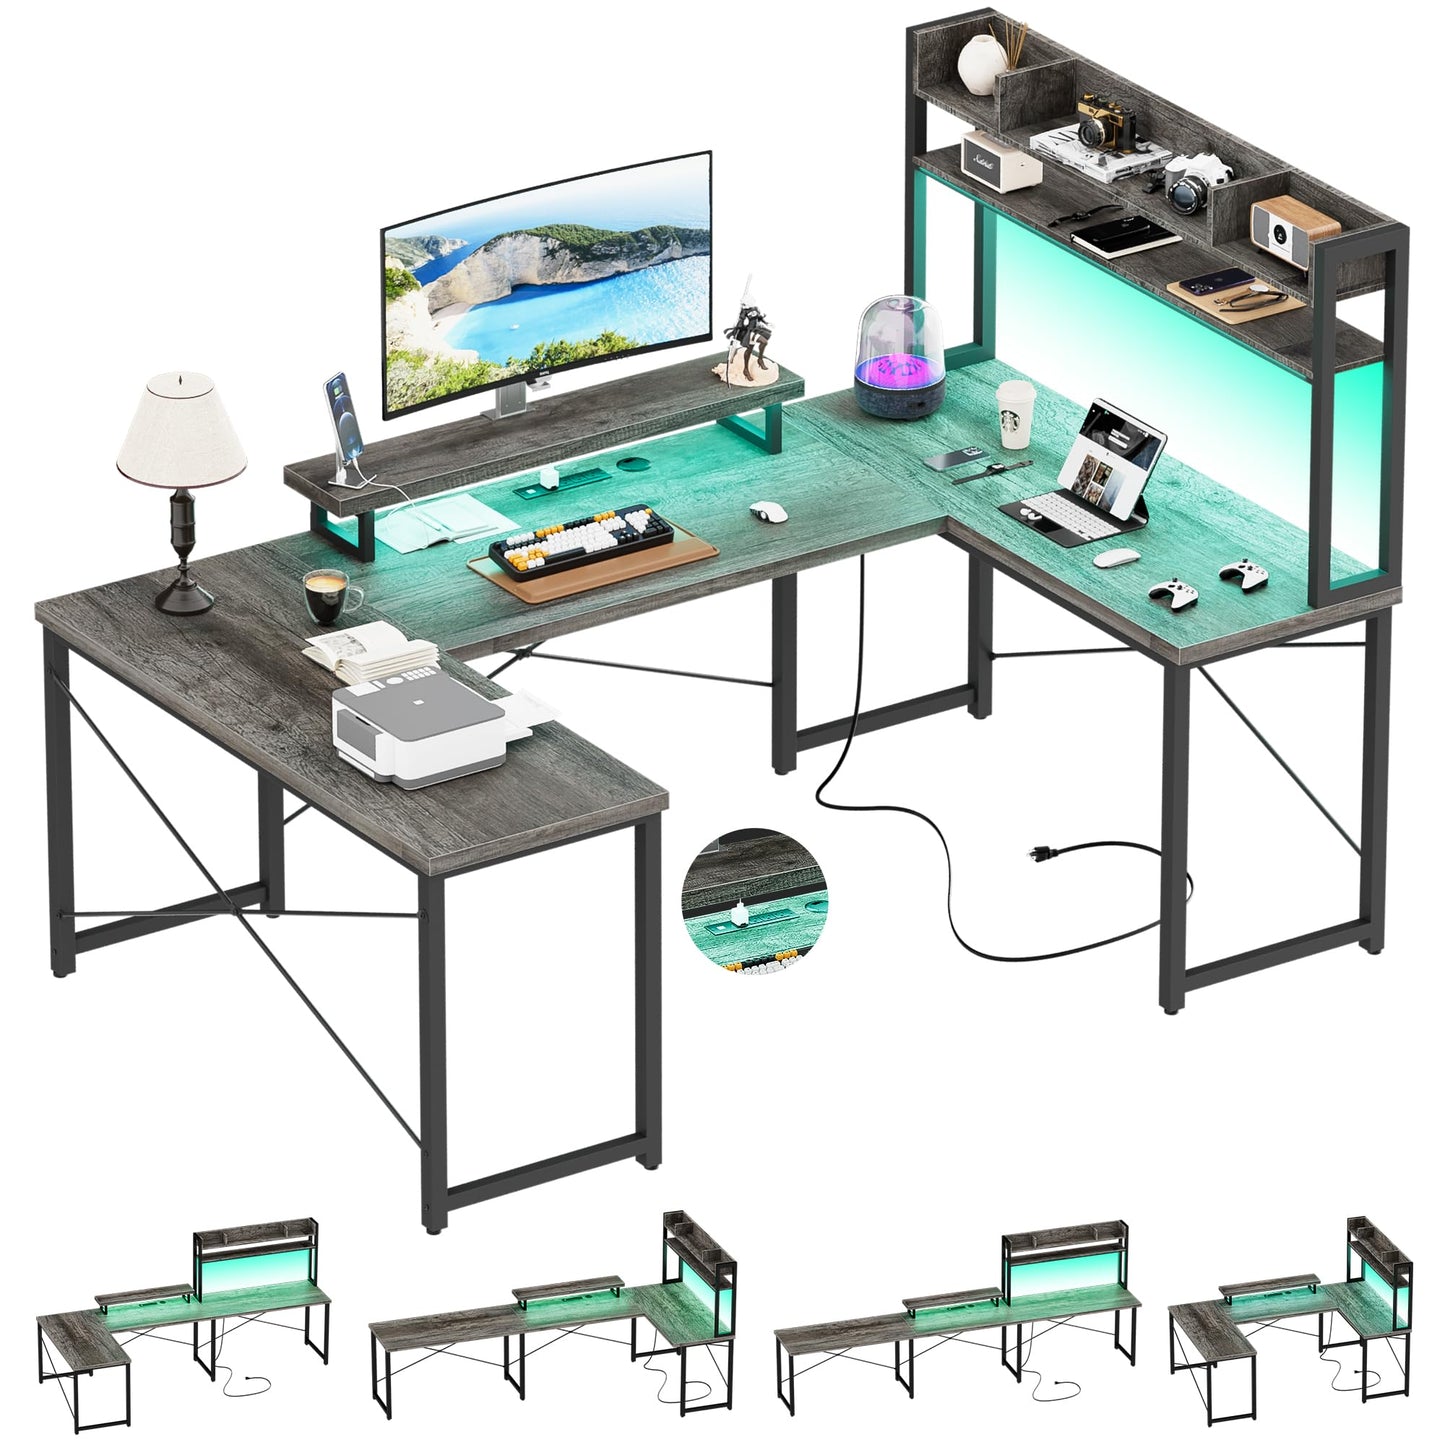 Unikito DIY U Shaped Computer Desk with Hutch, Reversible L Shaped Office Desk with Power Outlets and LED Strip, Customizable Large 98 Inch L Shape Gaming Corner Desk with Monitor Stand, Black Oak